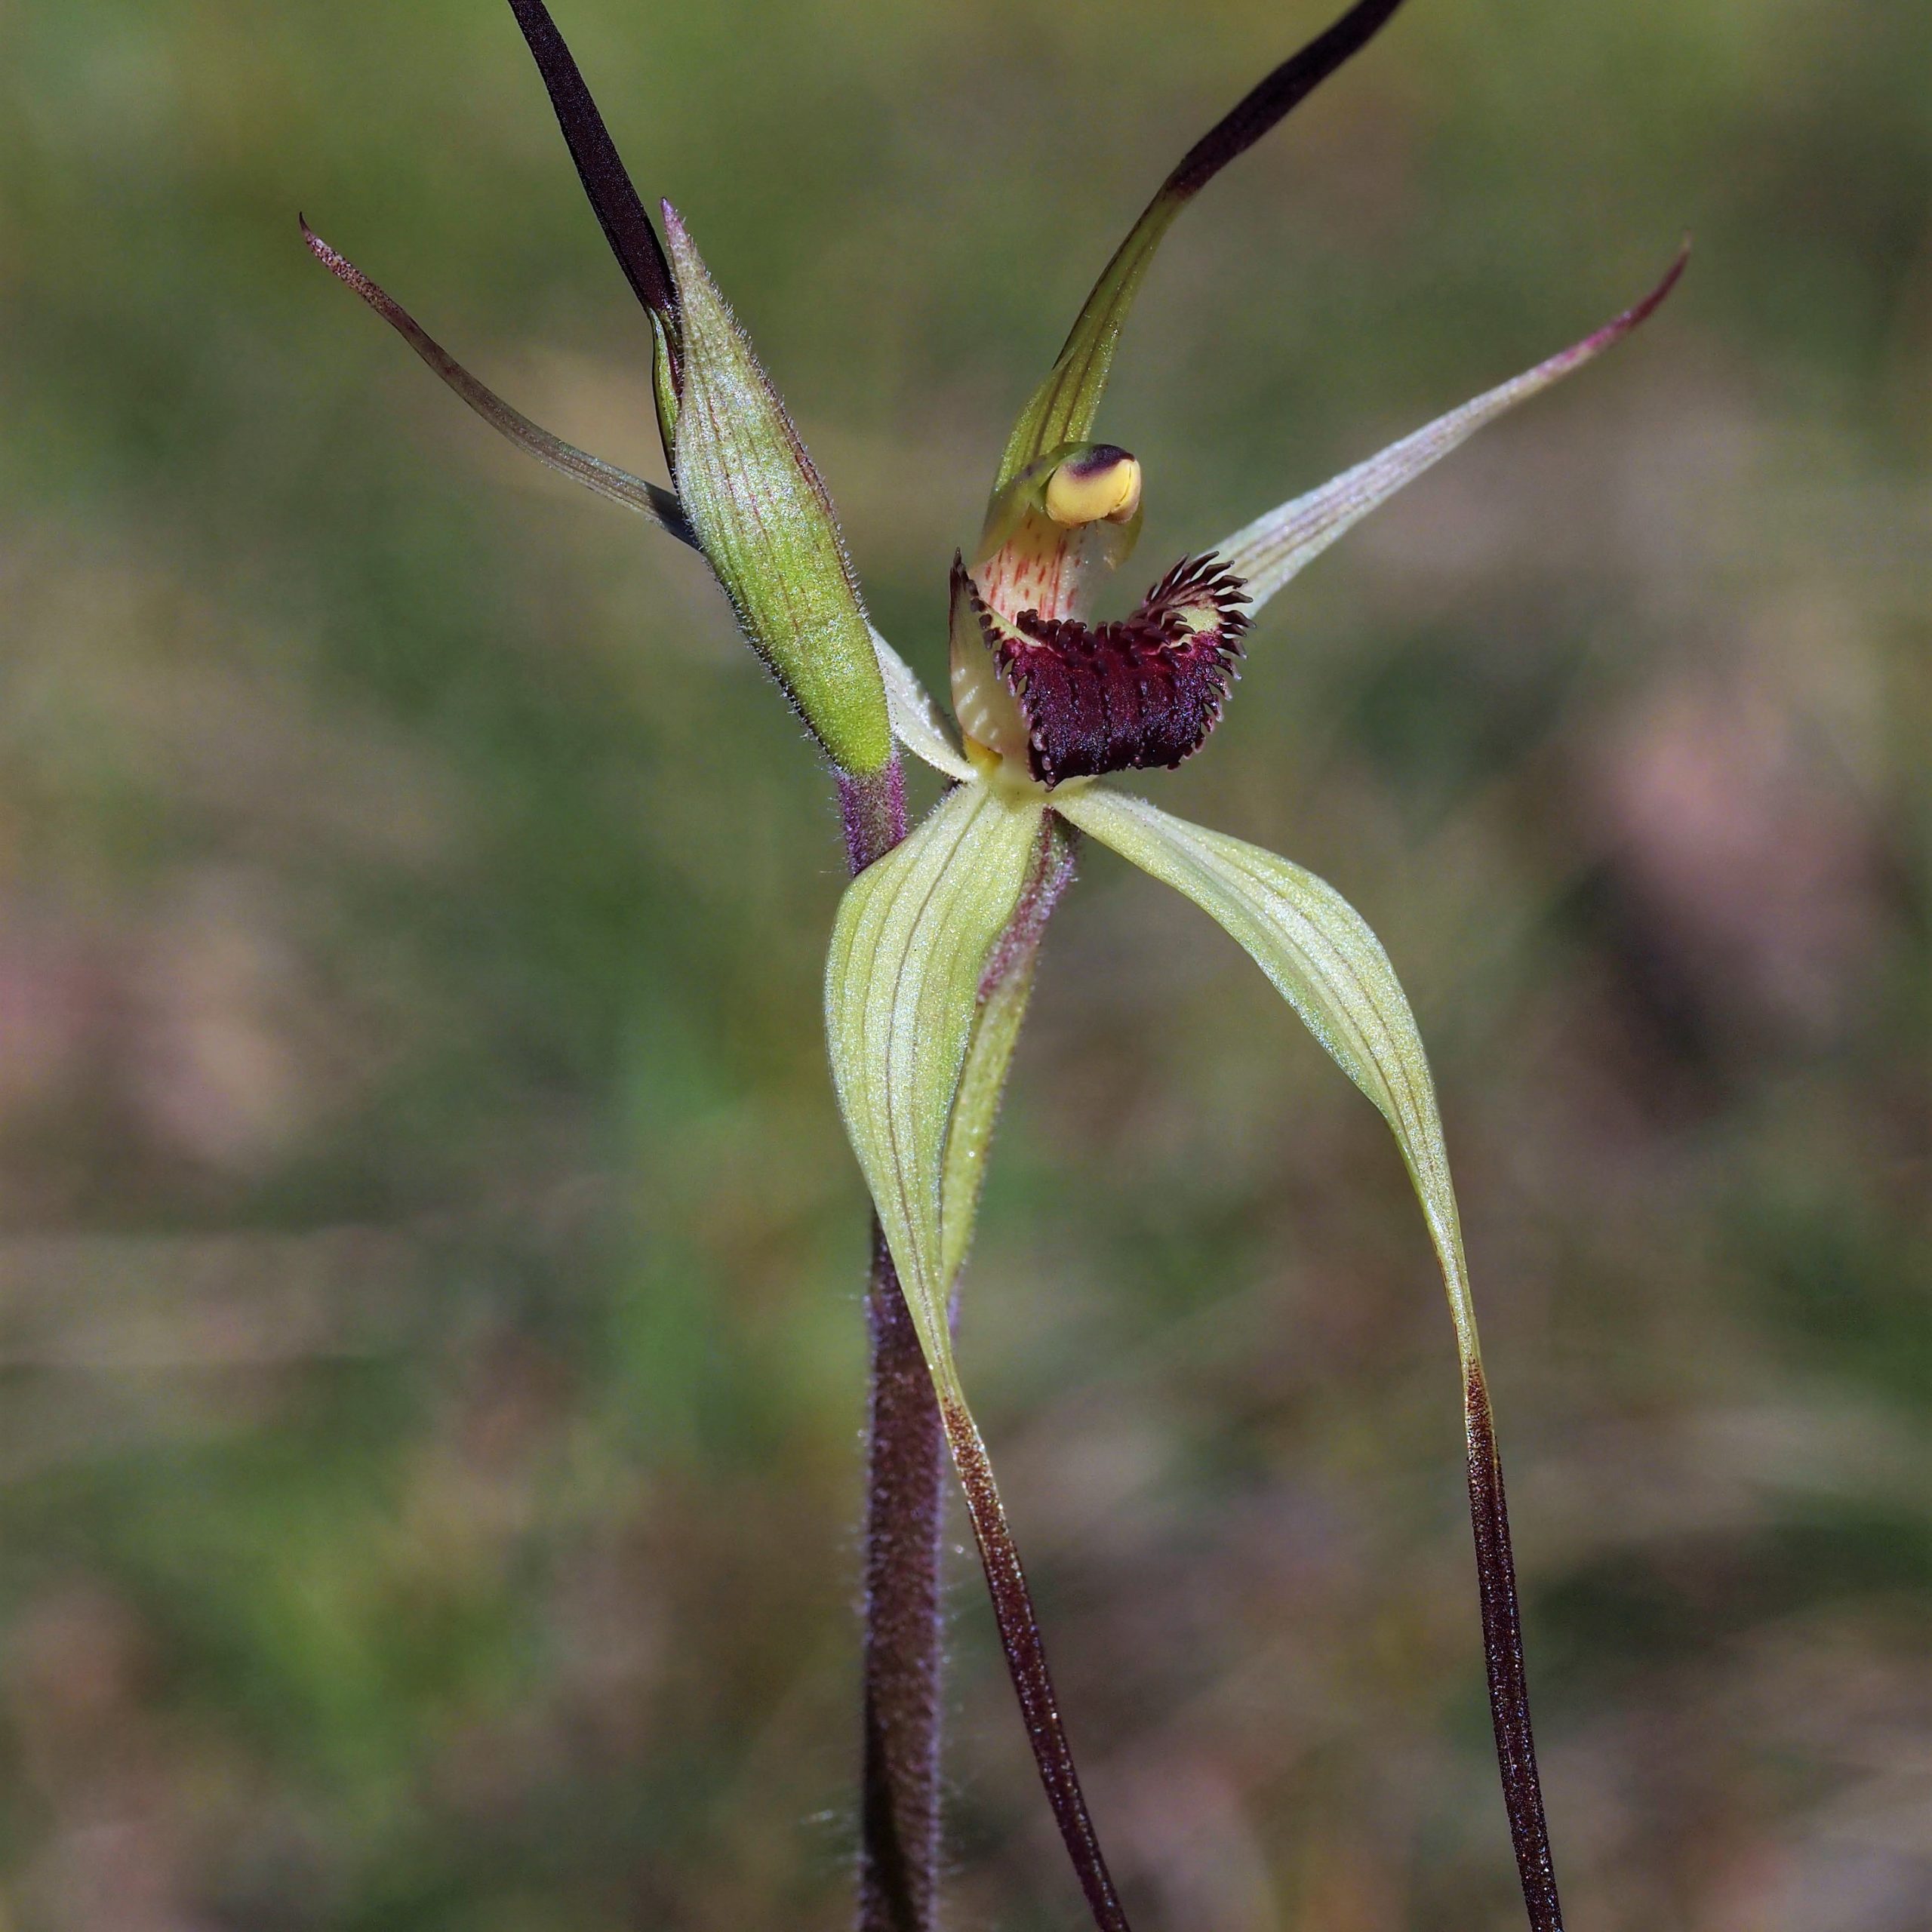 Raymond Island Spider-orchid. Image by Andrew Bould, Bairnsdale and District Field Naturalists.